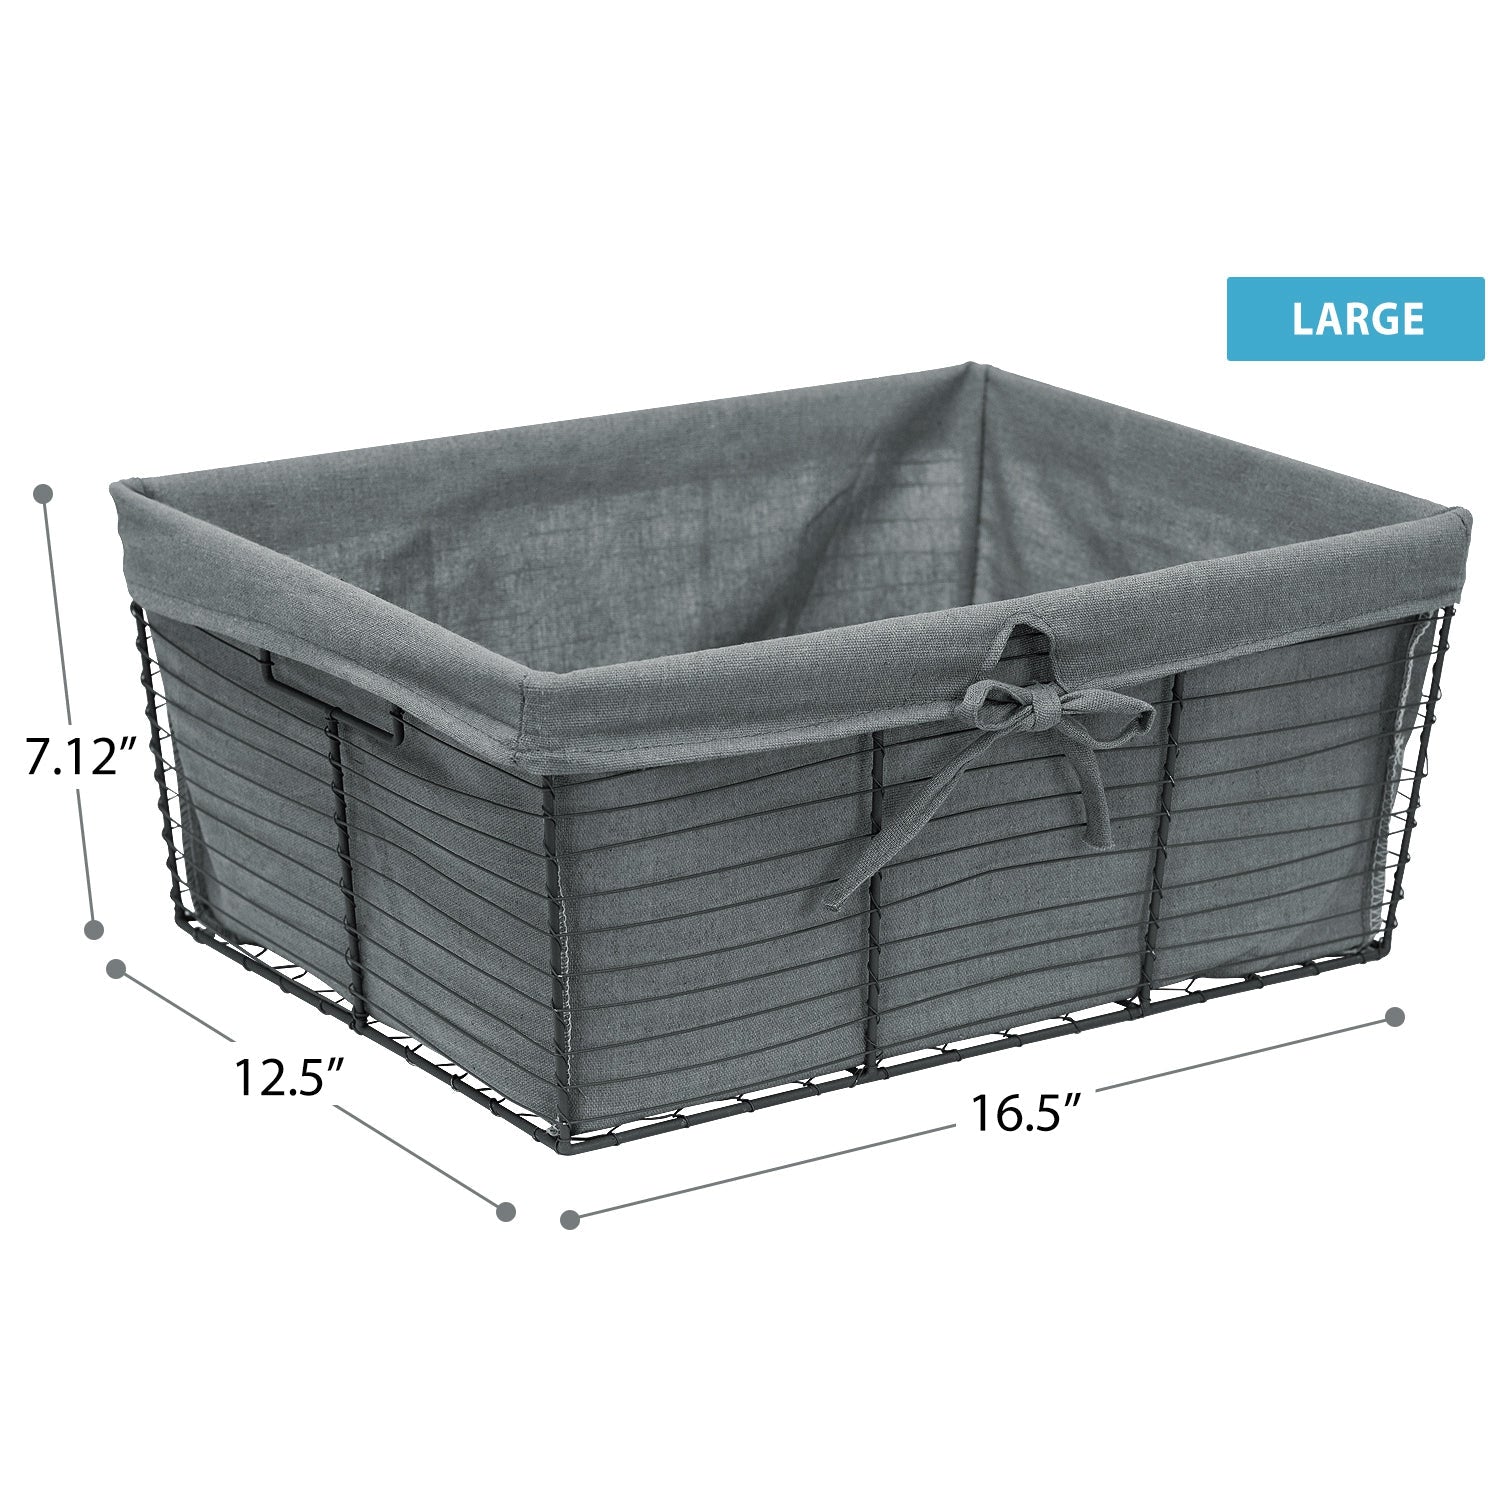 Sorbus Wire Basket with Liner Set for Pantry & Bathroom